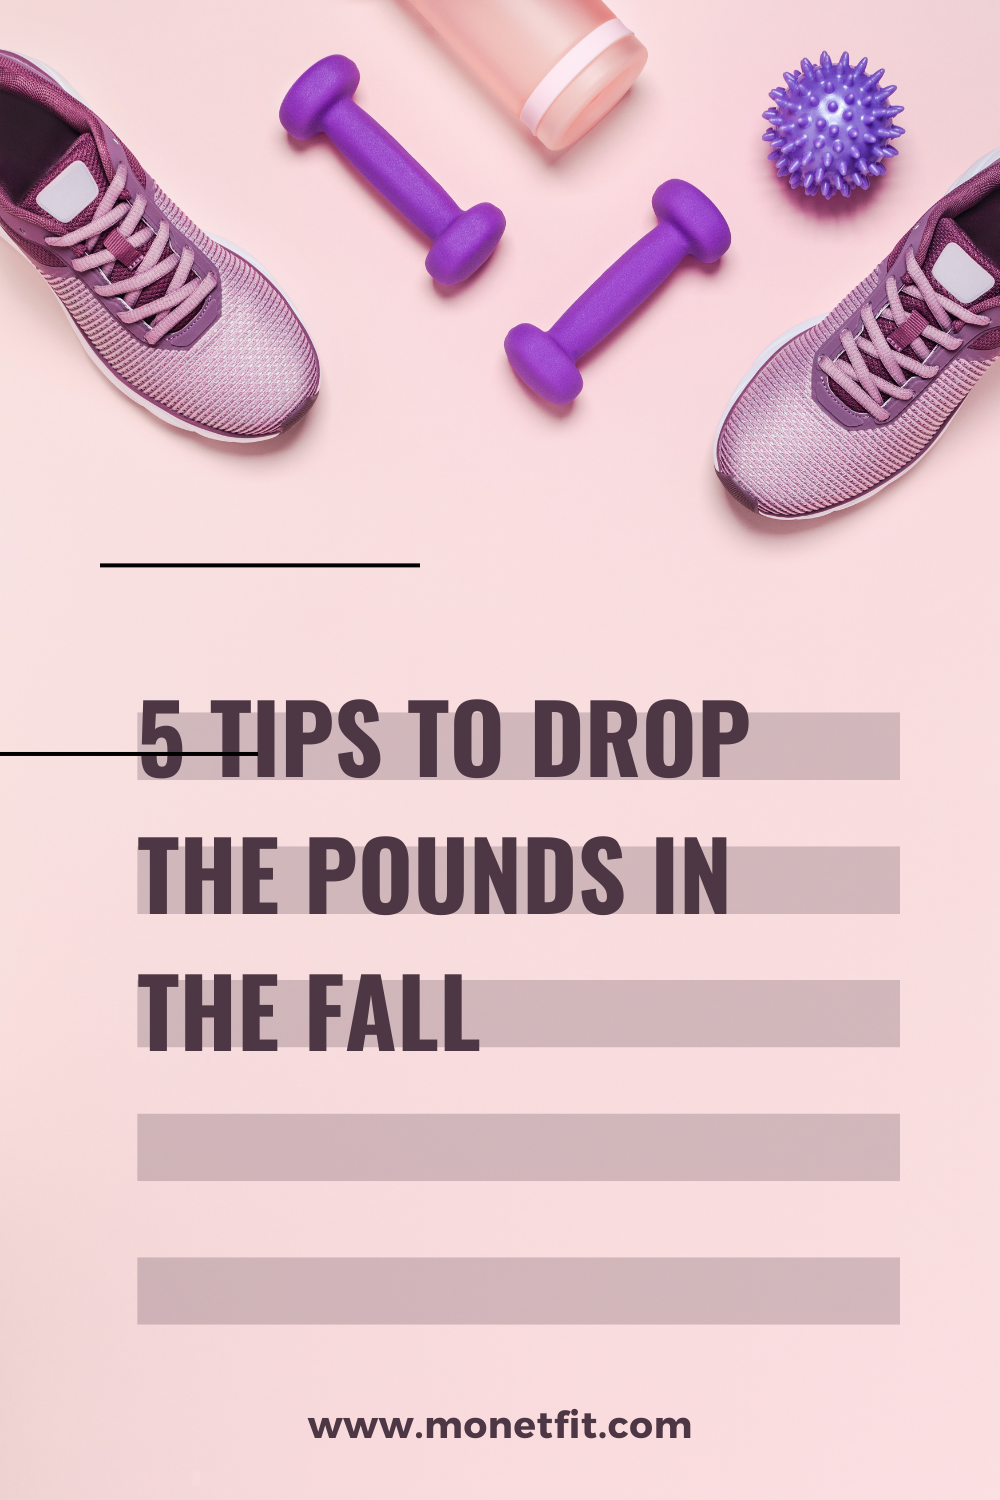 Fall into Fitness: 5 Tips for Shedding Those Extra Pounds!